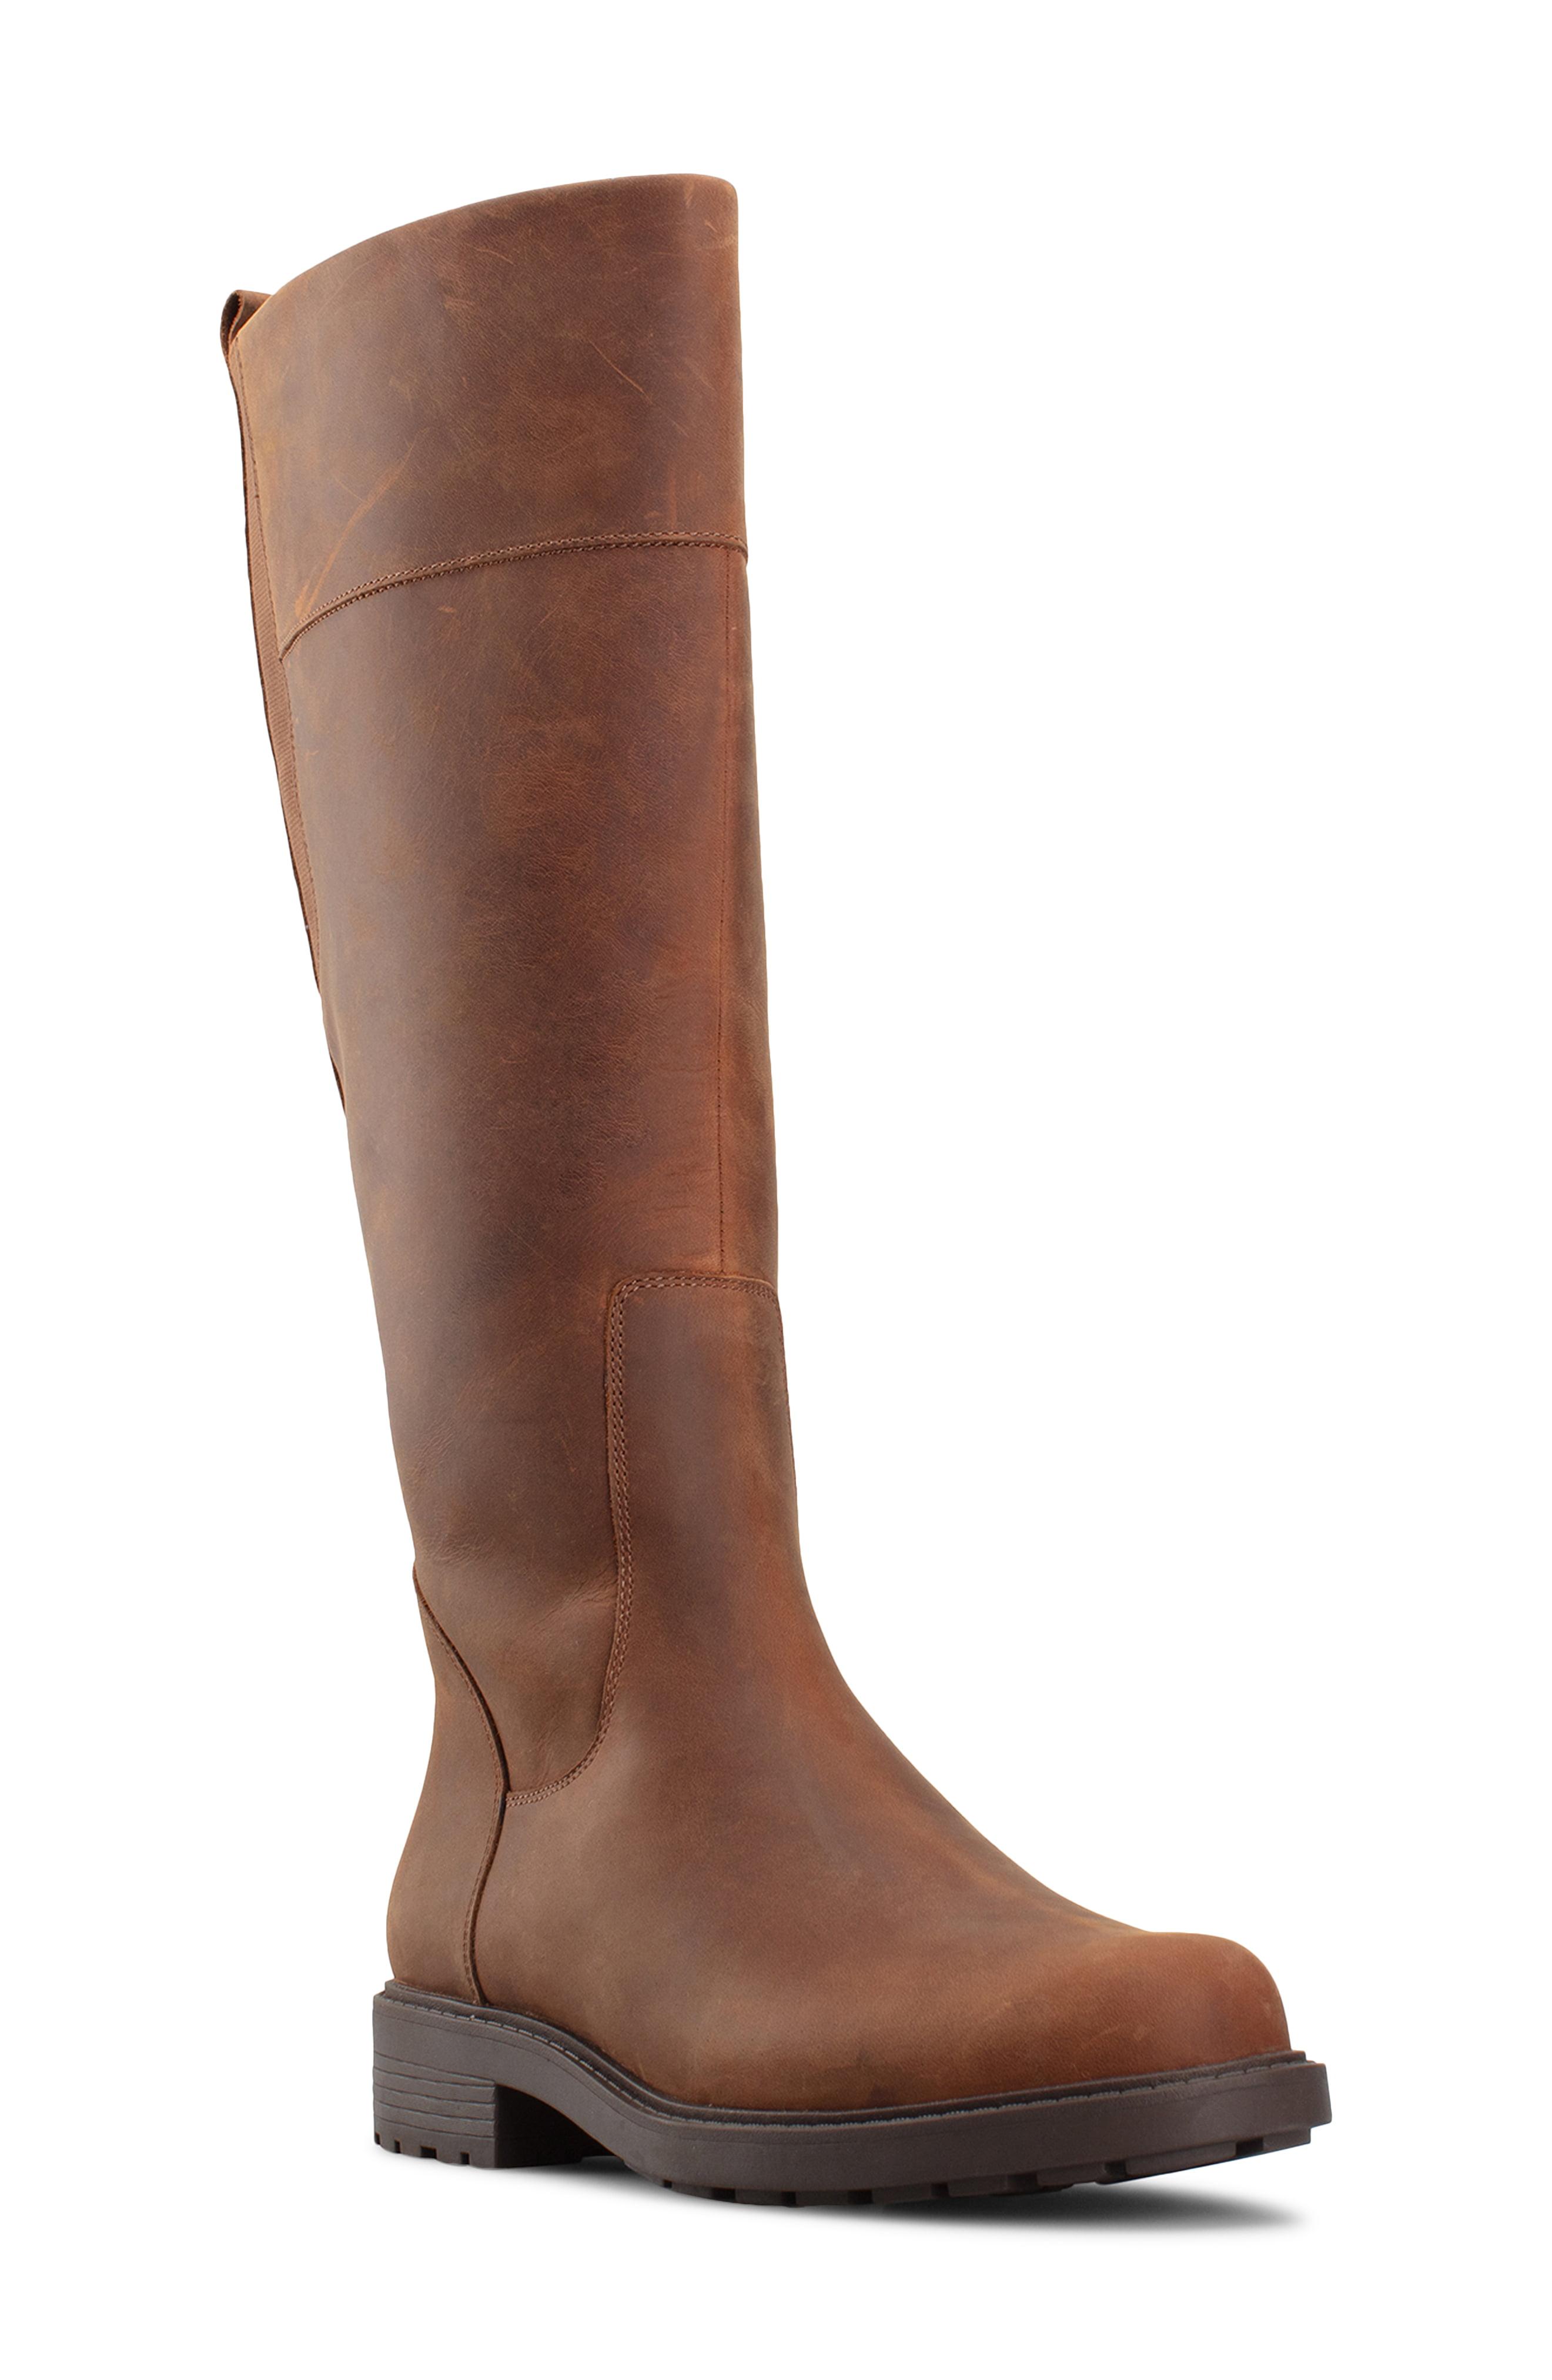 clarks gore tex knee high boots